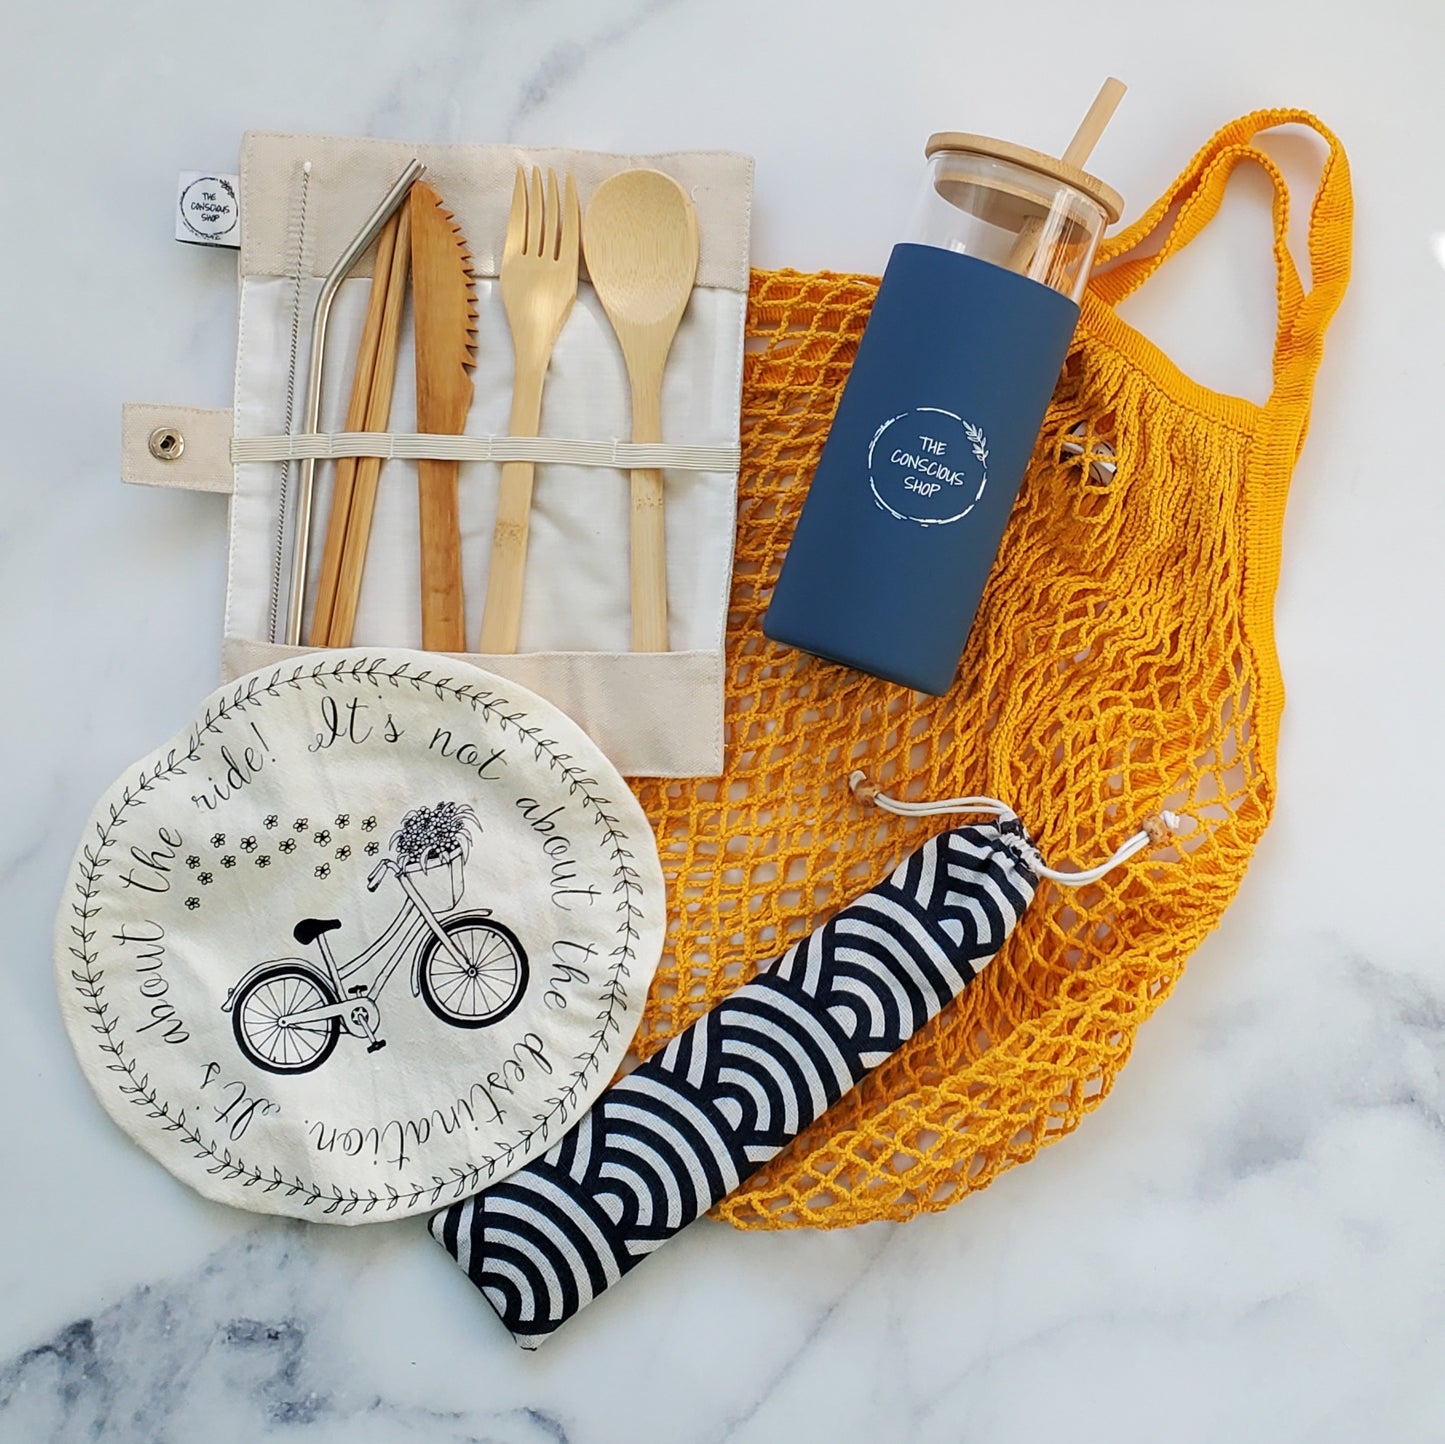 On the go Lunch Set Bundle with Reusable Cutlery Set, Stainless Steel Straws, Glass Water Bottle, Bowl Cover, & Mesh Shopping Tote Bag